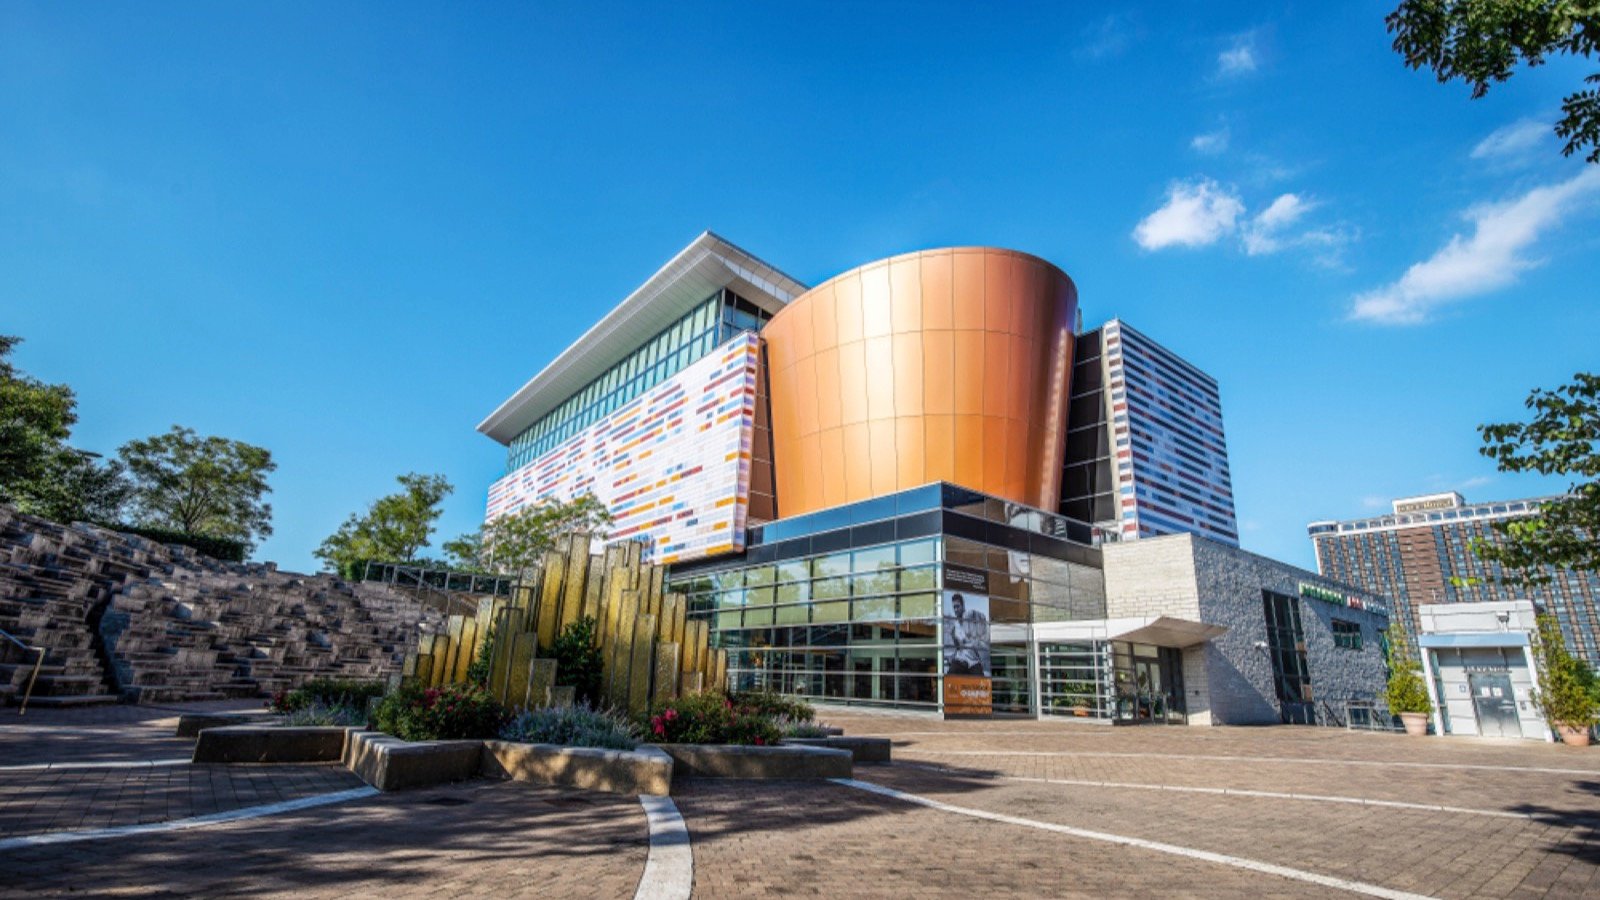 <p>Also in Louisville, the Muhammad Ali Center is a museum celebrating the legendary boxer Muhammad Ali. It has five levels of galleries, exhibits, artifacts, and films presenting snapshots of Ali’s life.</p>